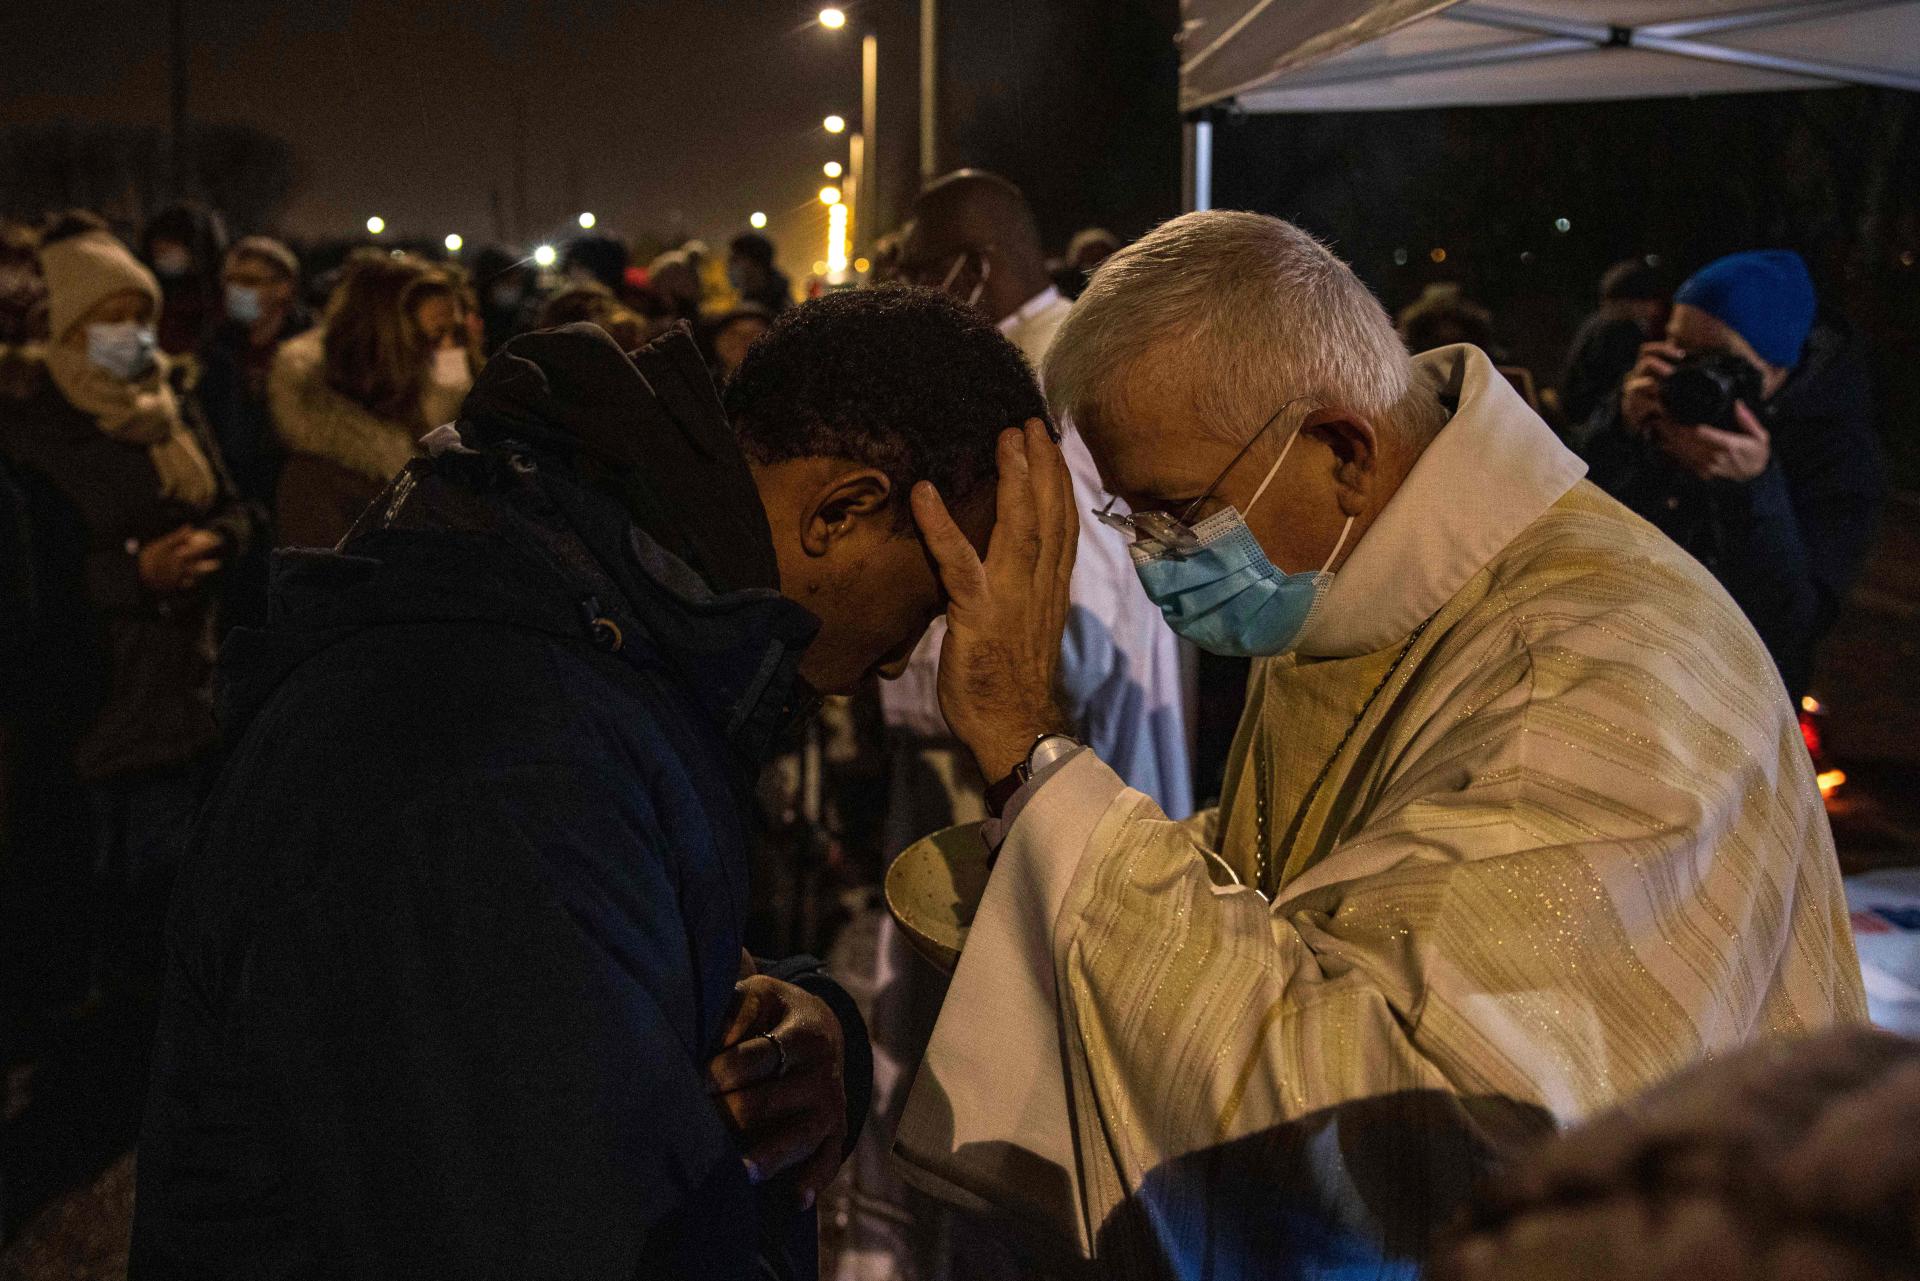 The Bishop of Aras, Mgr Olivier Leborgne, blesses a believer during a mass organized at a camp for the displaced in Calais (Pas-de-Calais) on Friday, December 24.